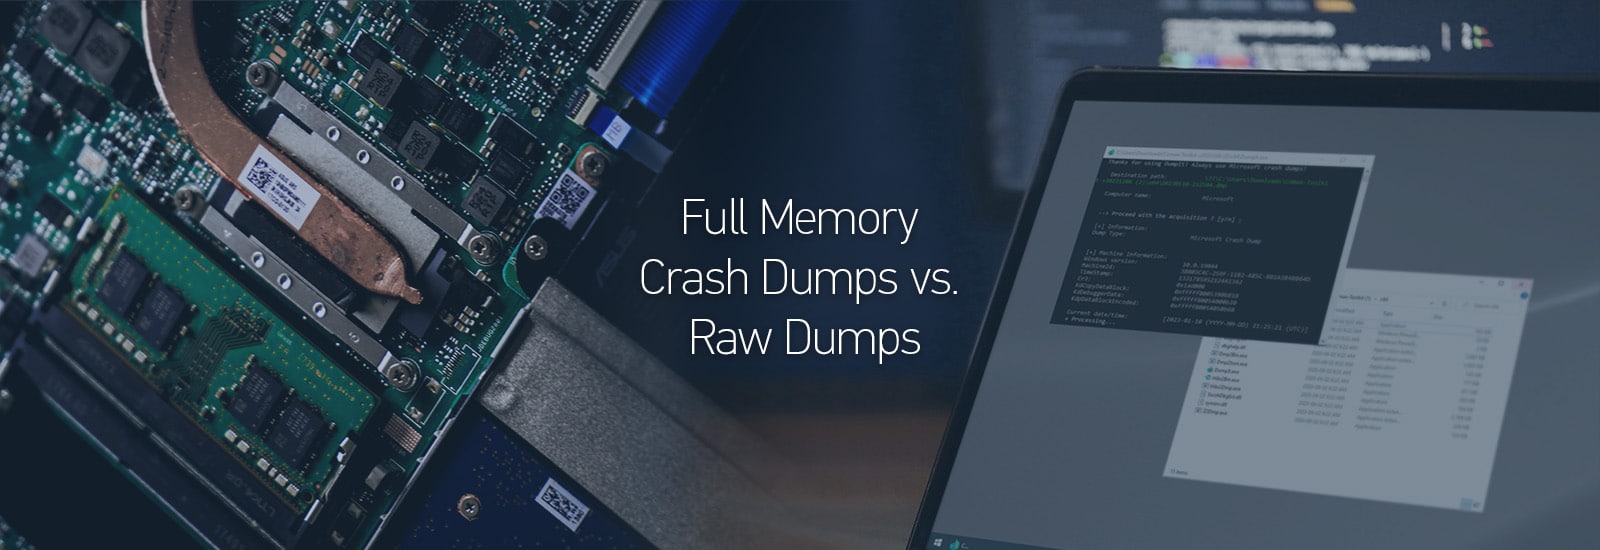 Full Memory Crash Dumps vs. Raw Dumps: Which Is Best for Memory Analysis for Incident Response ?